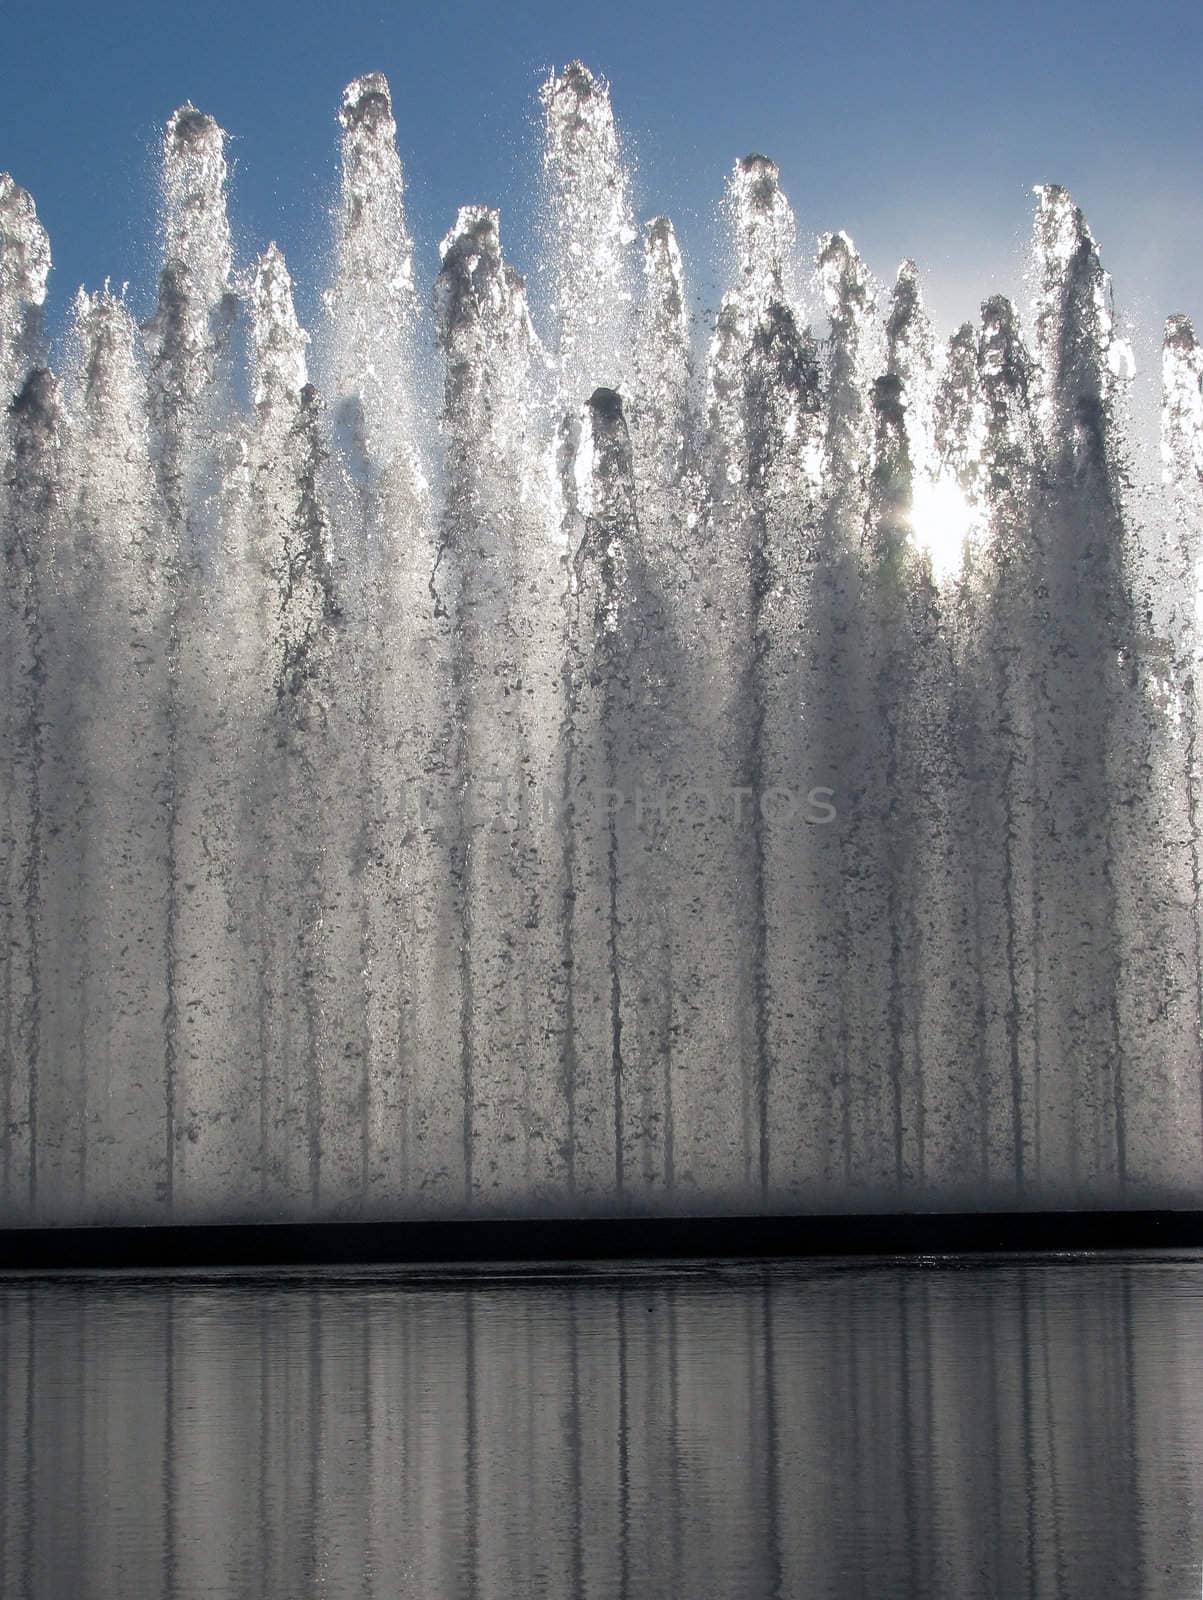 The sun through a fountain and reflecting pool.
